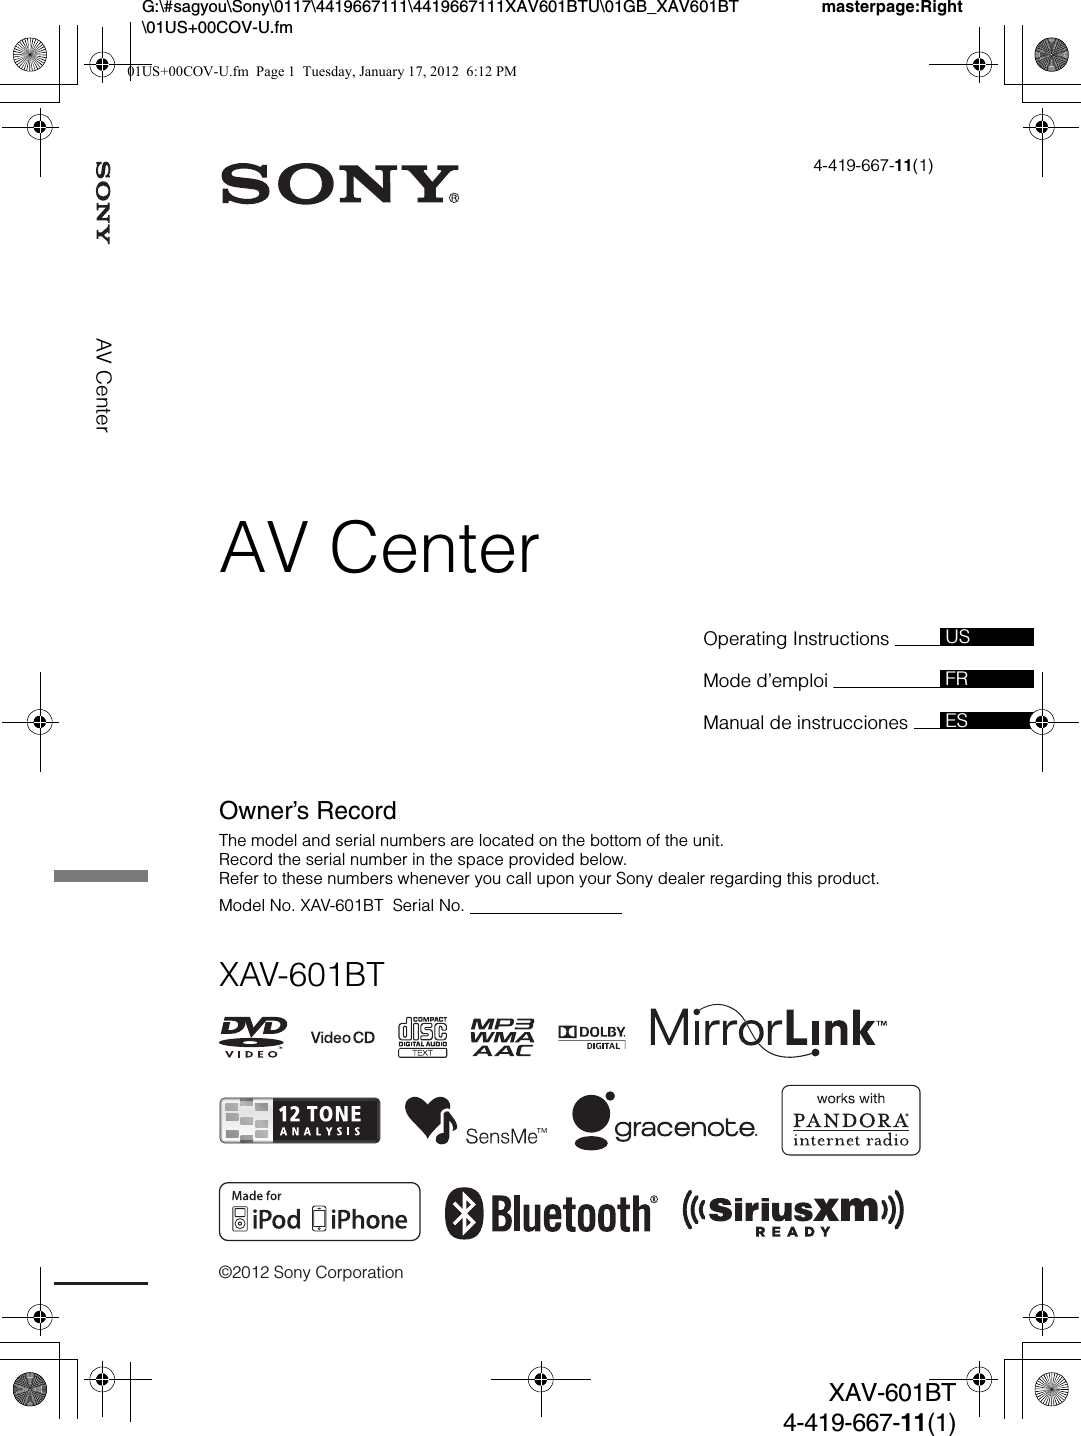 ©2012 Sony Corporation4-419-667-11(1)XAV-601BTAV CenterOwner’s RecordThe model and serial numbers are located on the bottom of the unit.Record the serial number in the space provided below.Refer to these numbers whenever you call upon your Sony dealer regarding this product.Model No. XAV-601BT  Serial No.                                  masterpage:RightG:\#sagyou\Sony\0117\4419667111\4419667111XAV601BTU\01GB_XAV601BT\01US+00COV-U.fmXAV-601BT4-419-667-11(1)Operating Instructions Mode d’emploi Manual de instrucciones USFRESAV Center01US+00COV-U.fm  Page 1  Tuesday, January 17, 2012  6:12 PM